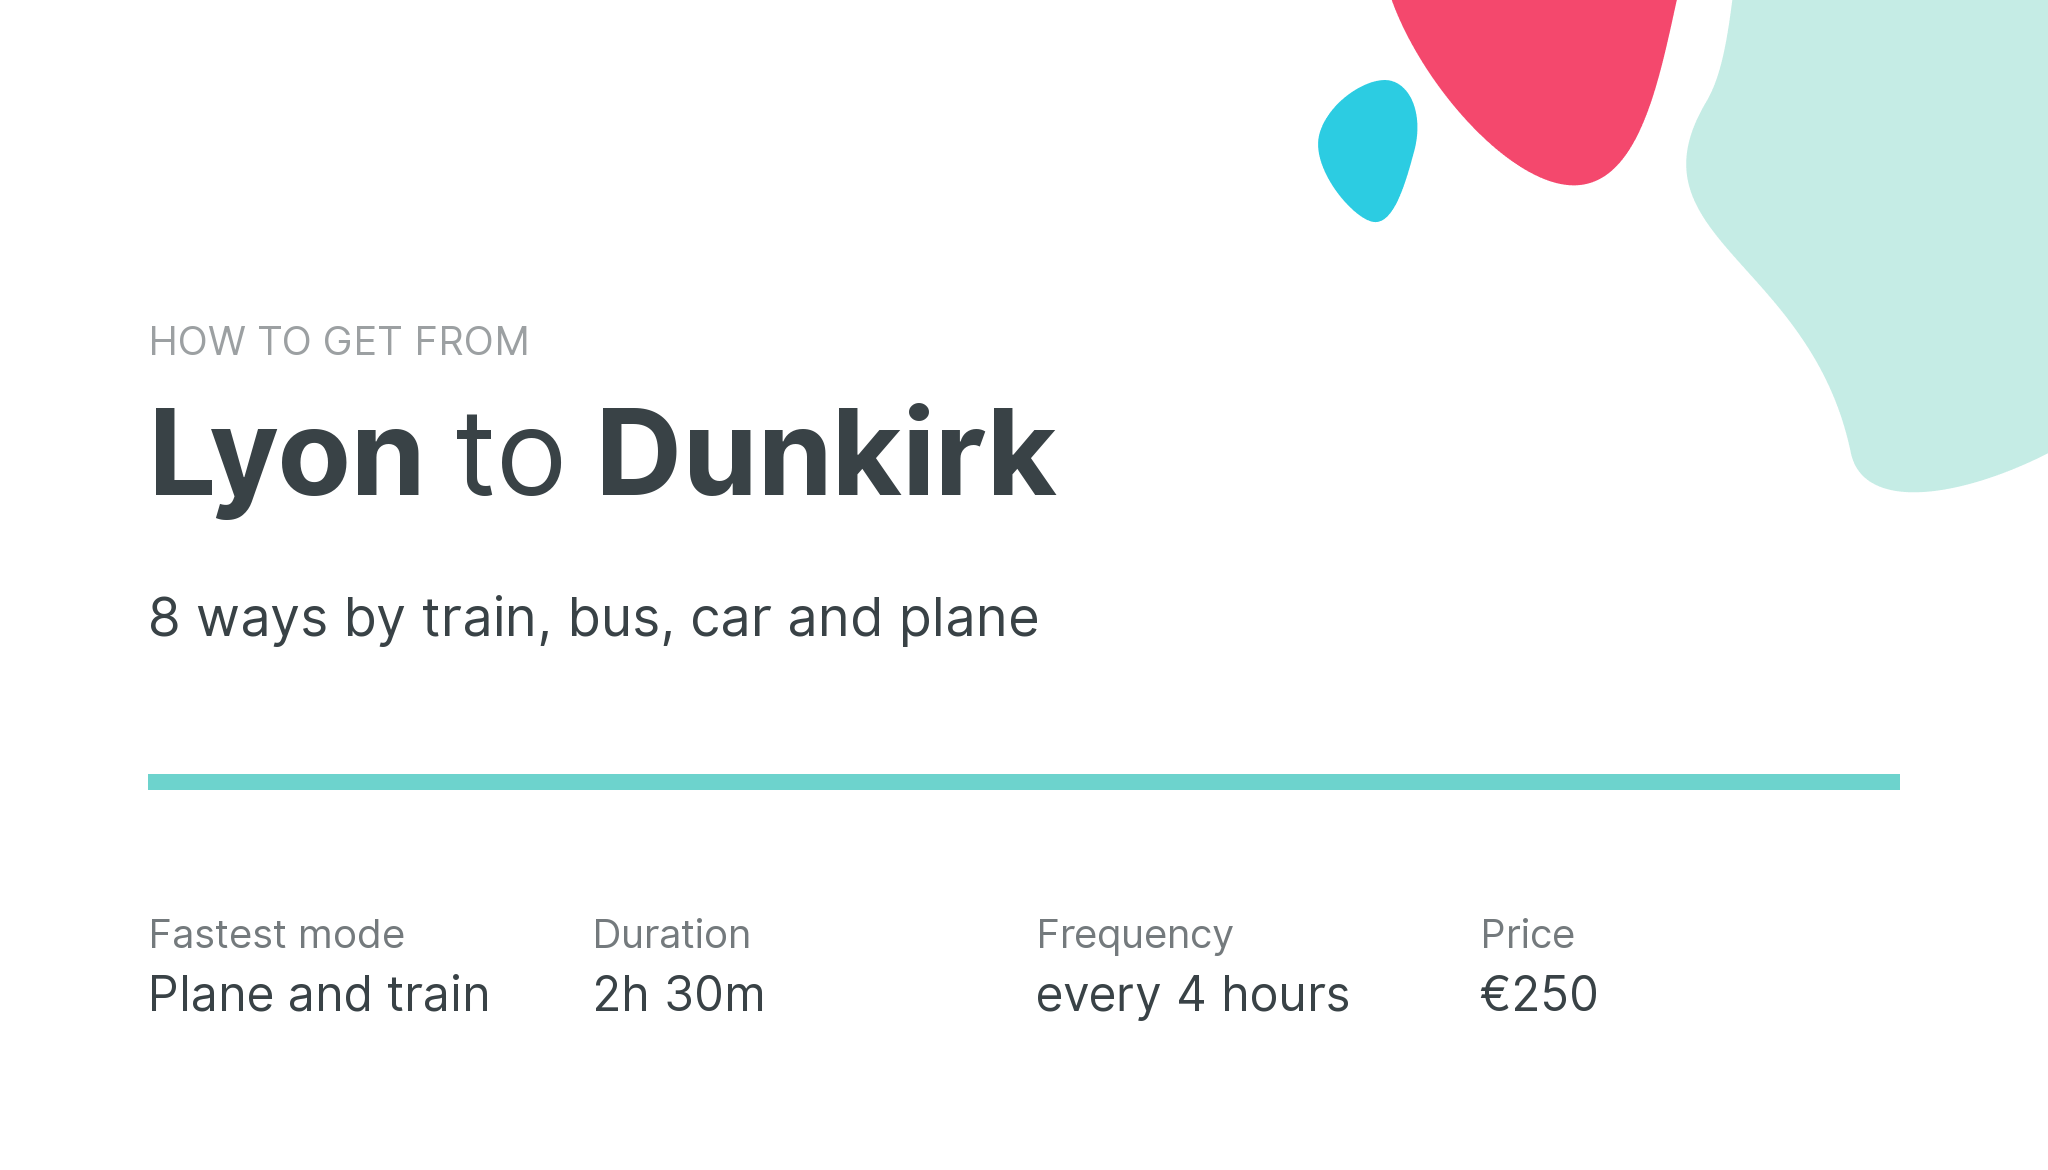 How do I get from Lyon to Dunkirk